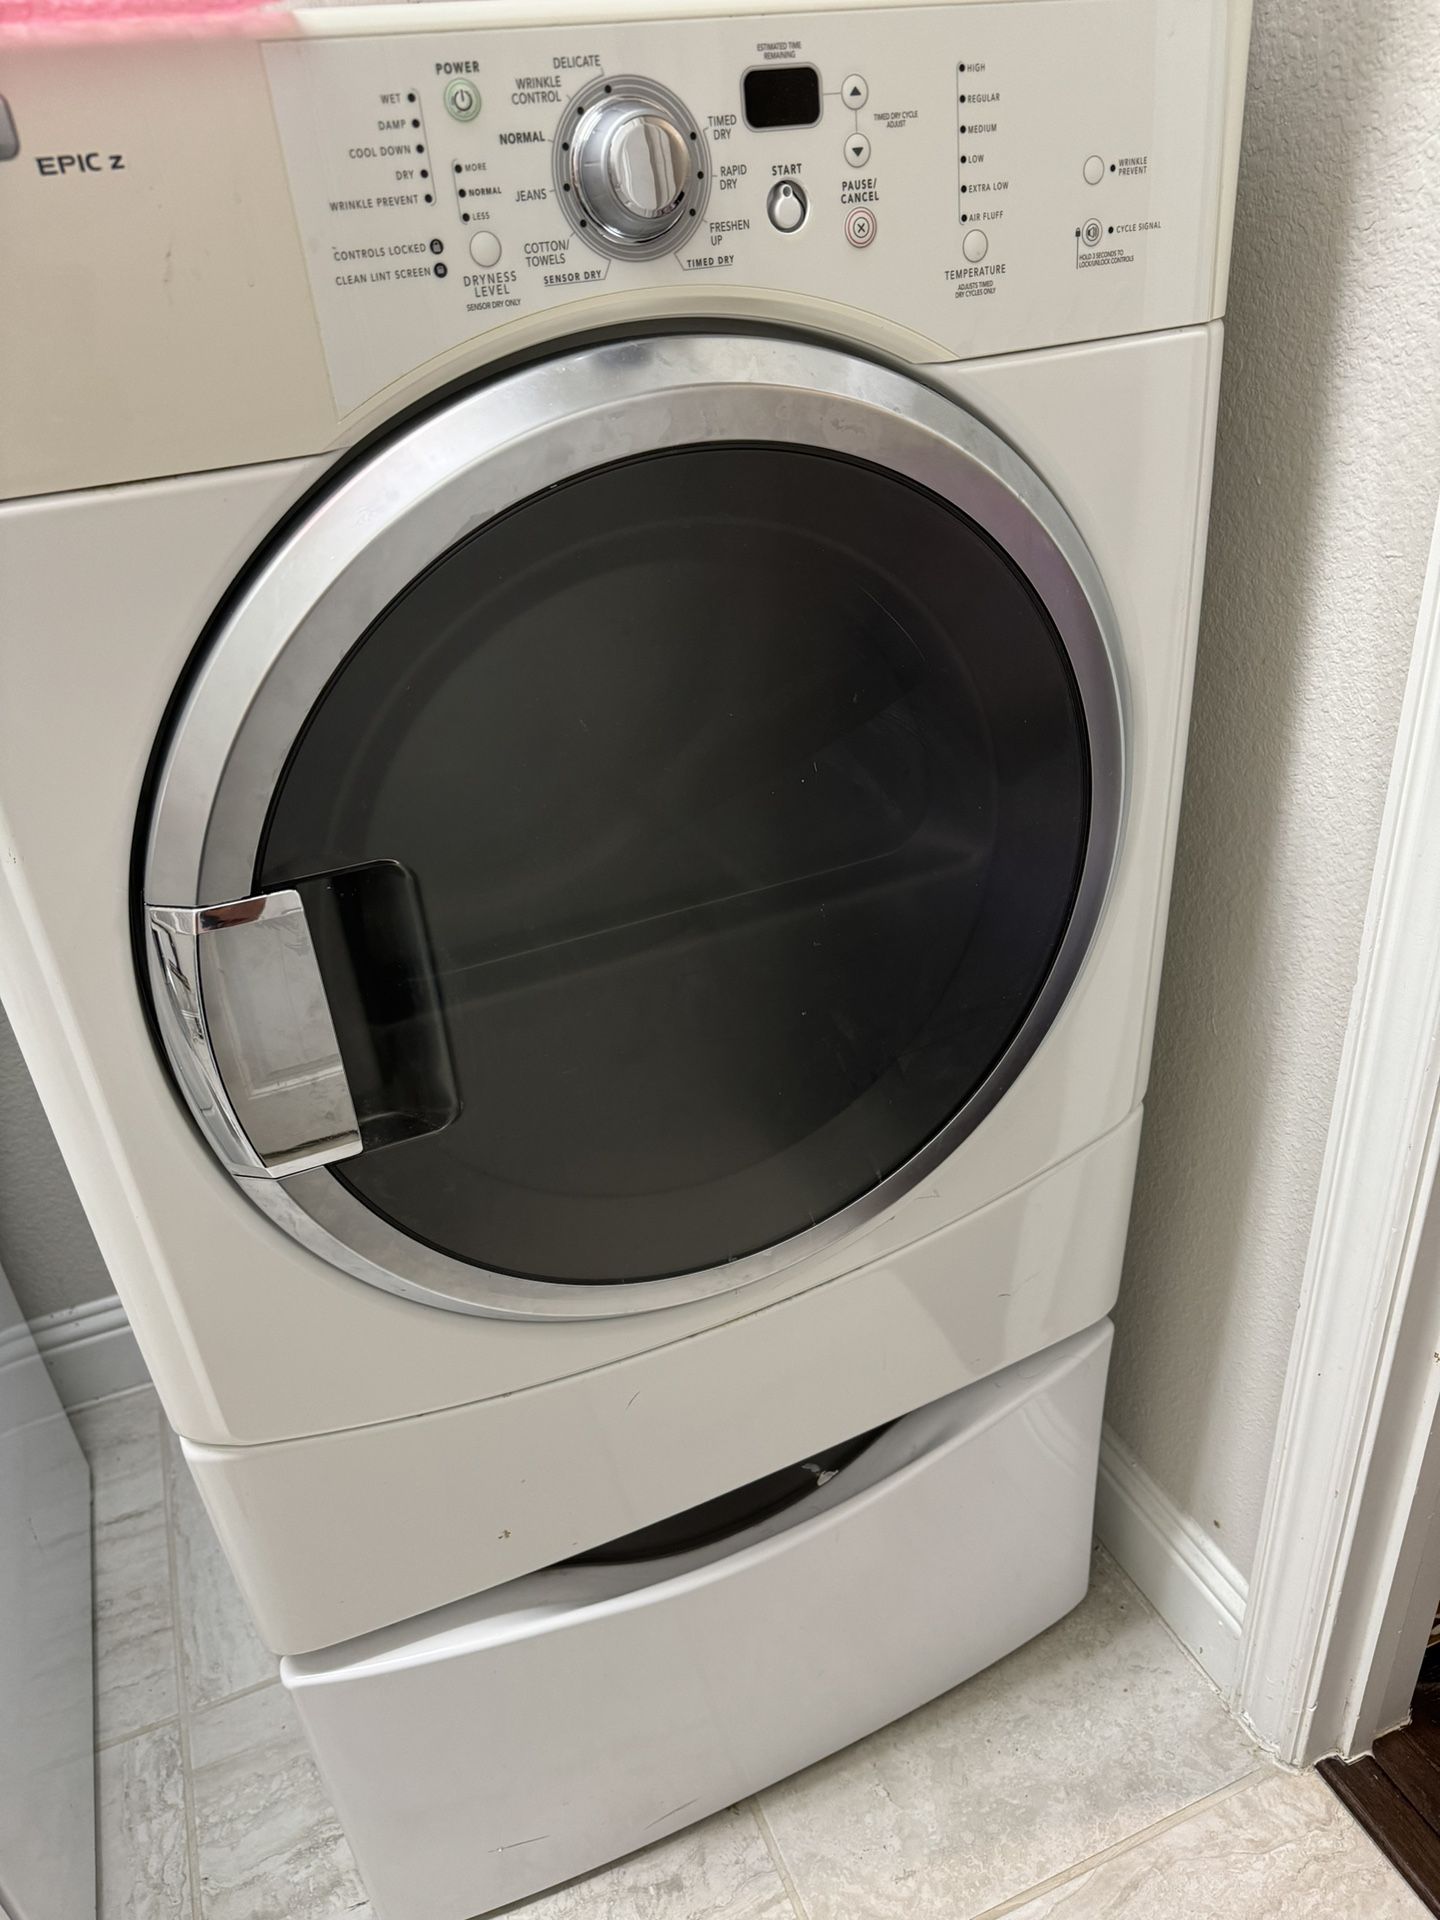 Washer And Dryer. Maytag epic z 